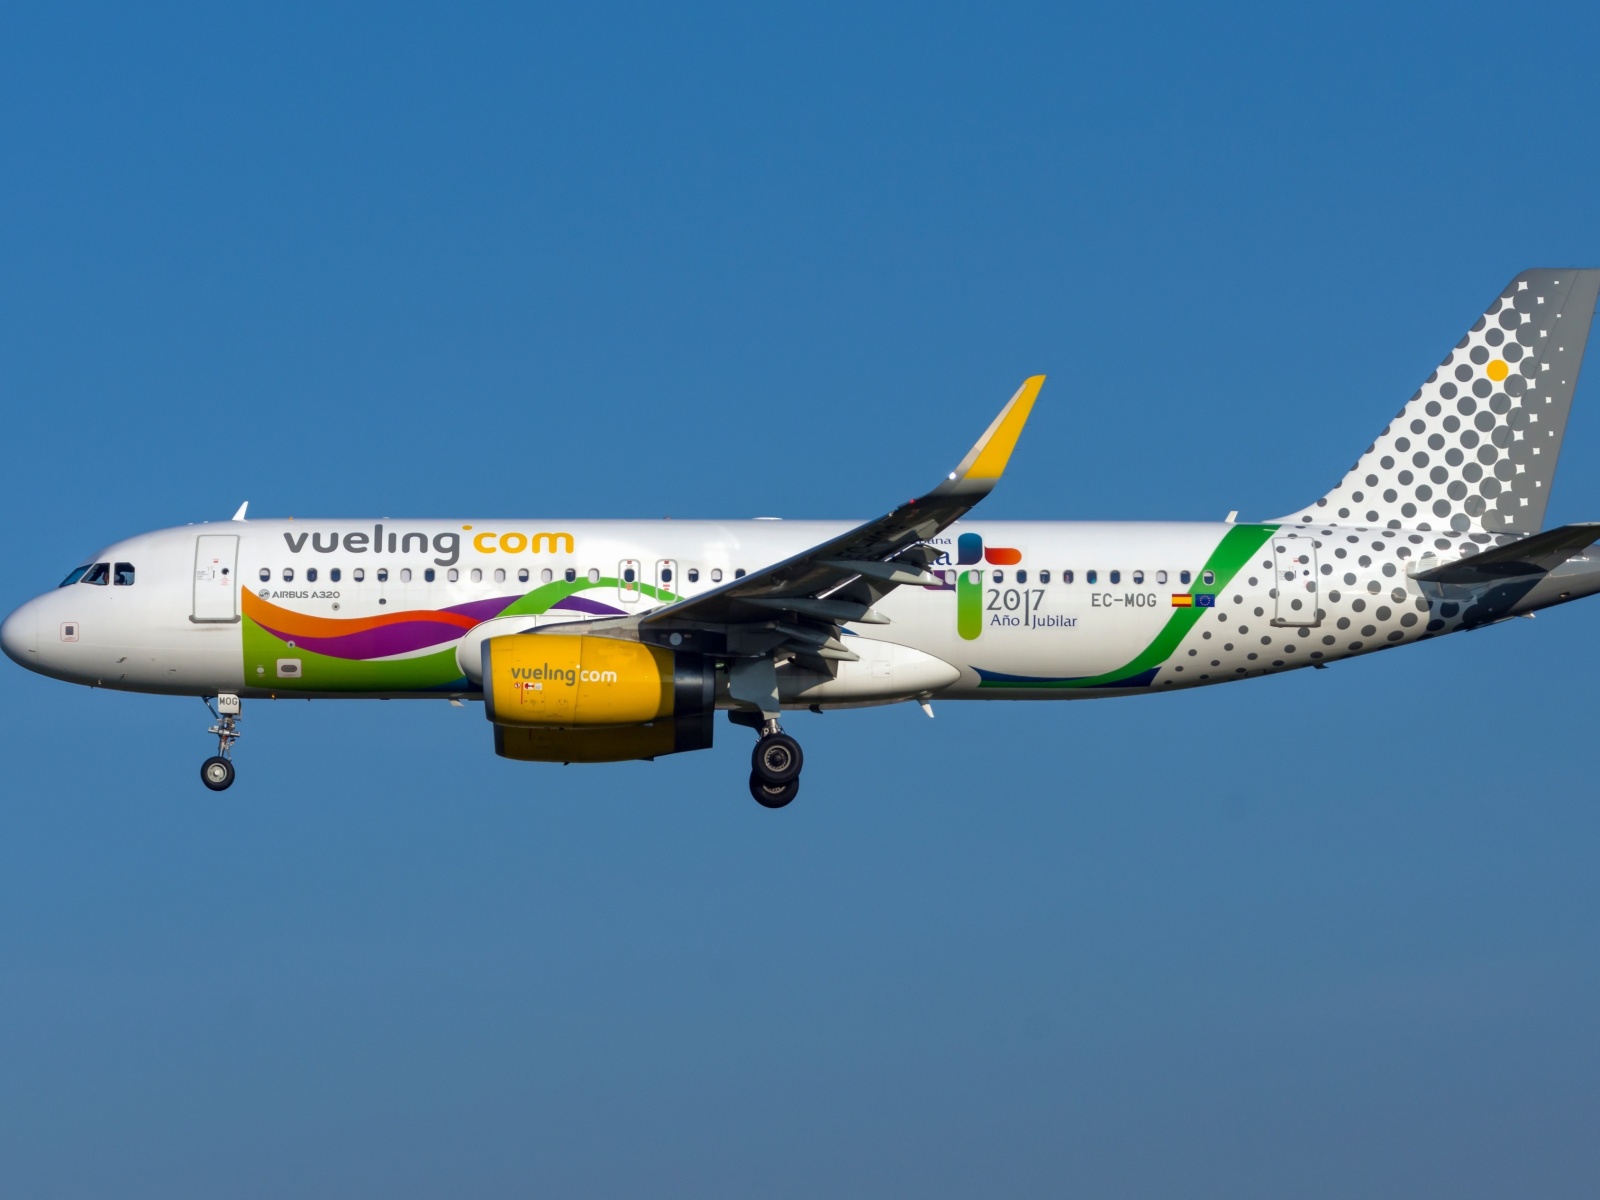 Airbus A320 Vueling Airlines wallpaper 1600x1200